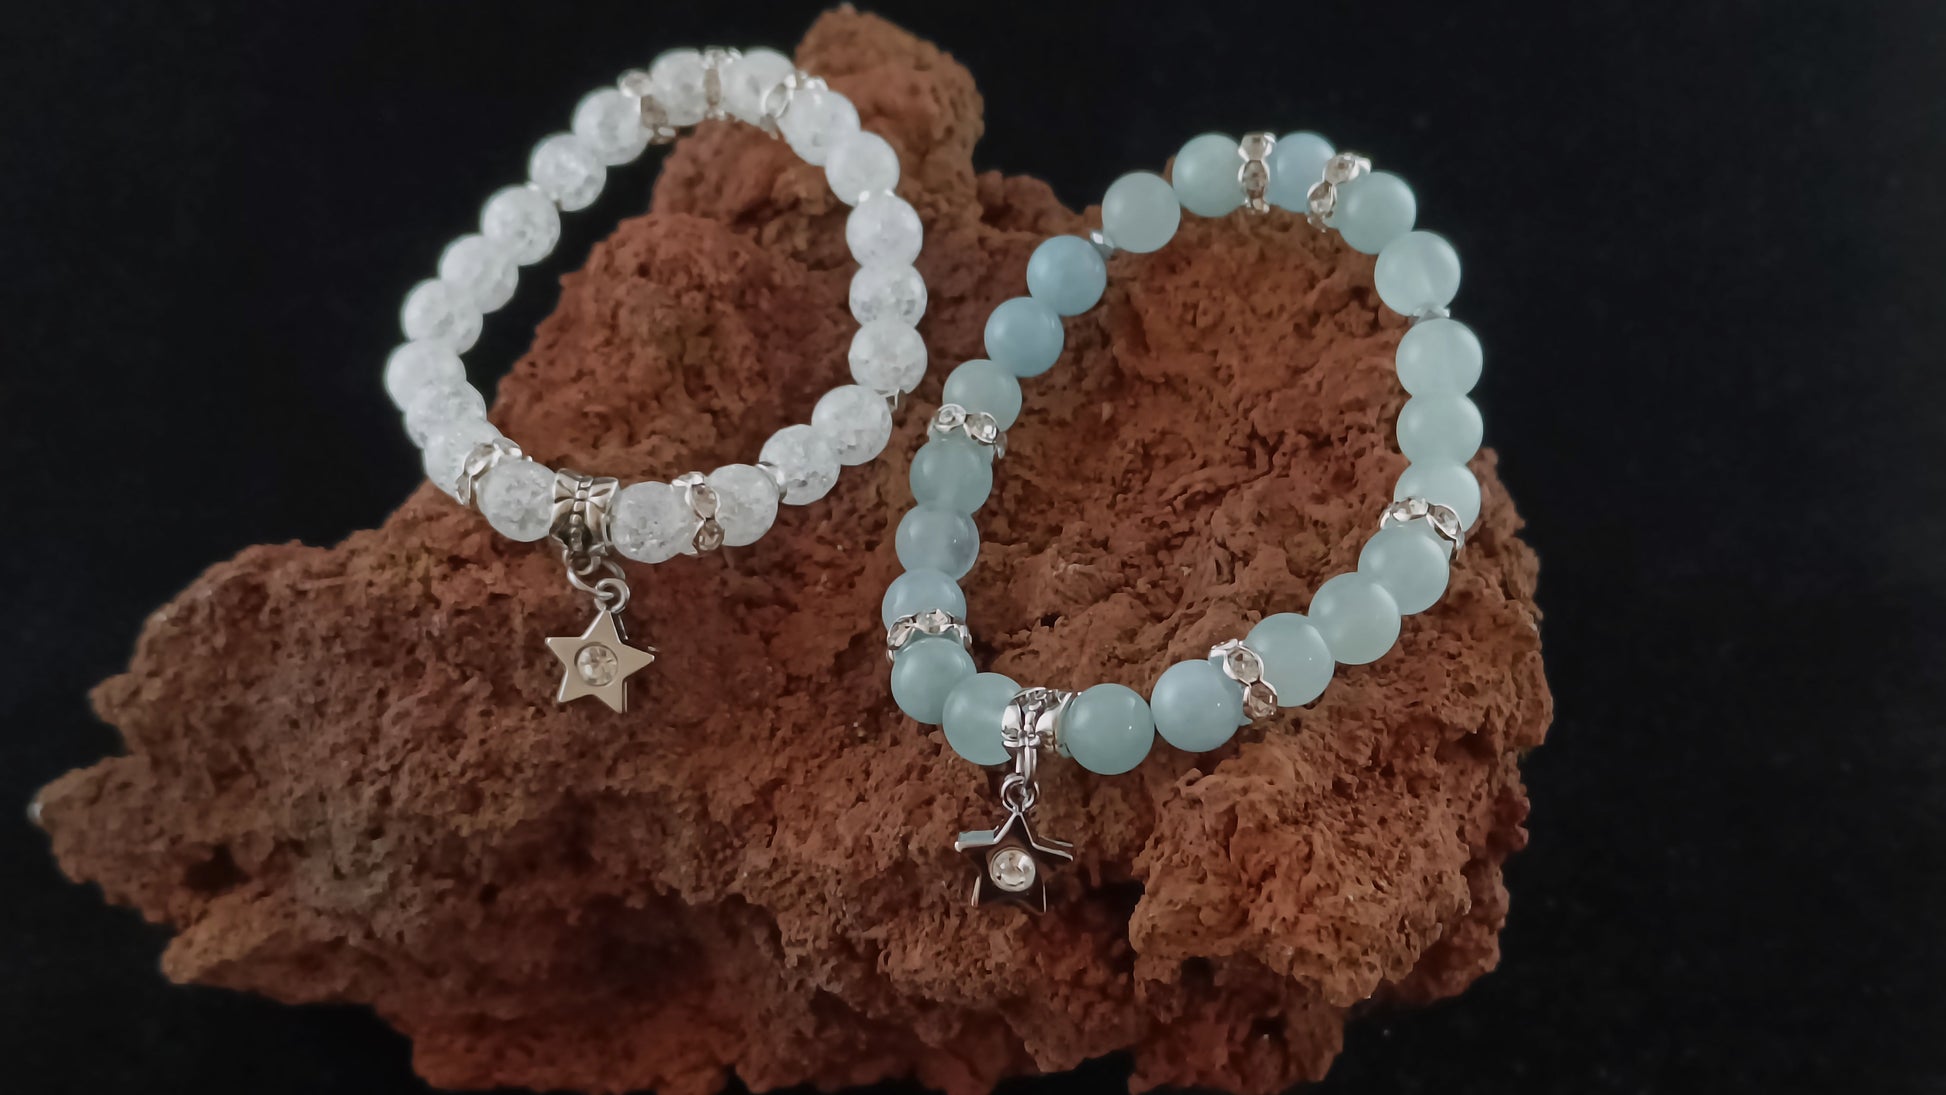 Two bright bracelets sit togather on a red magma display stone. On the left is a bracelet made from Cracked crystal beads and has a star center piece charm. On the right is a bracelet with bright blue aquamarine beads and a star center-piece